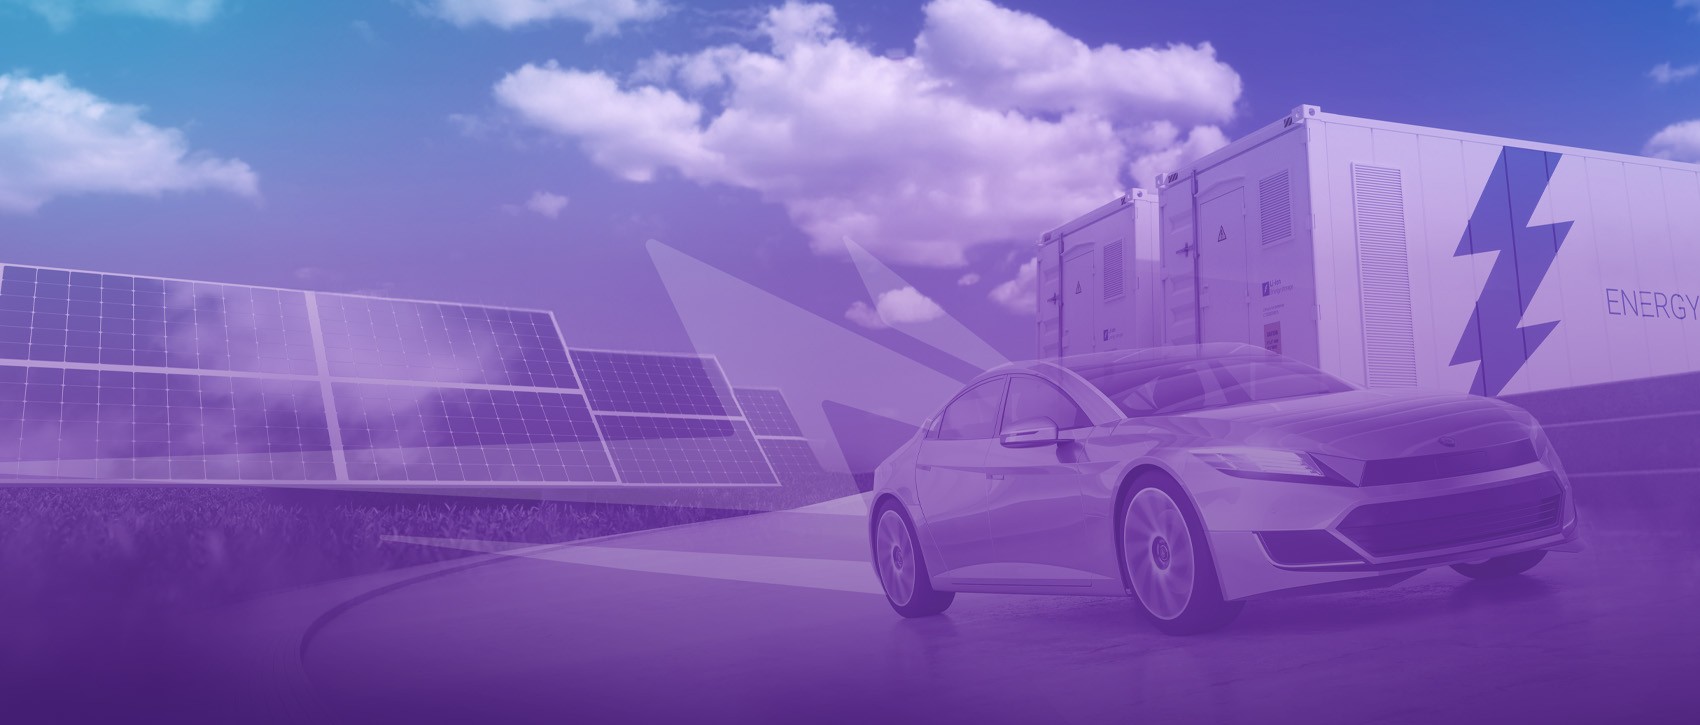 A blue-to-purple gradient overlaid on a composite image featuring battery storage, solar panels, and an electric car.